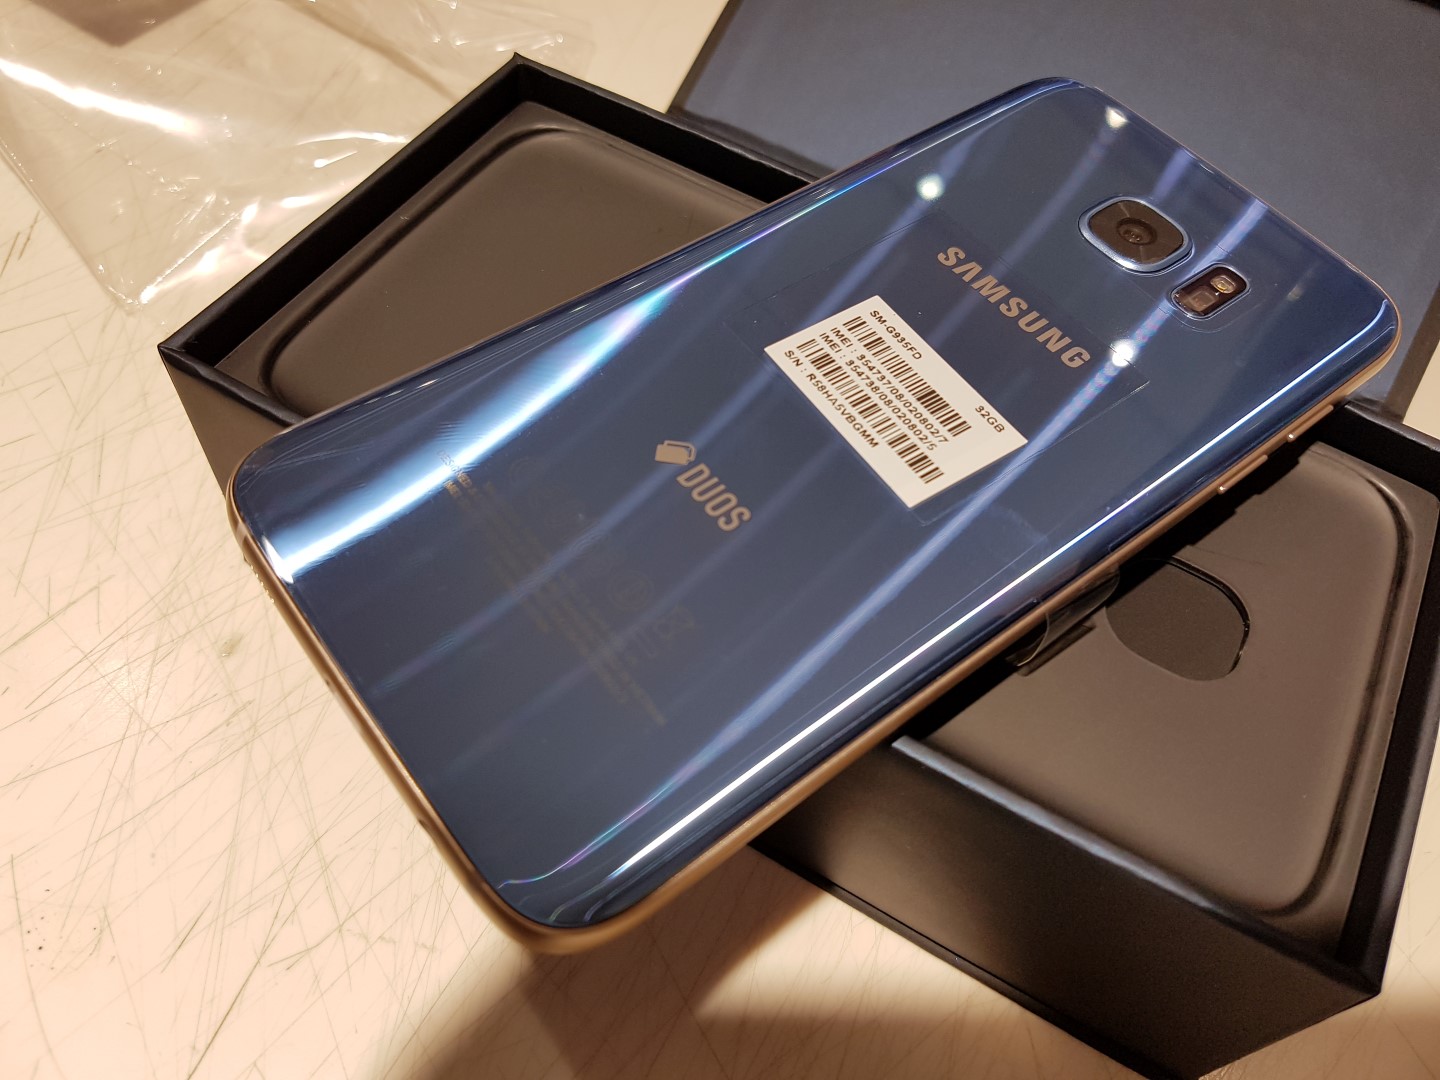 Check out these pictures of the Blue Coral Galaxy S7 edge ... - 1440 x 1080 jpeg 235kB